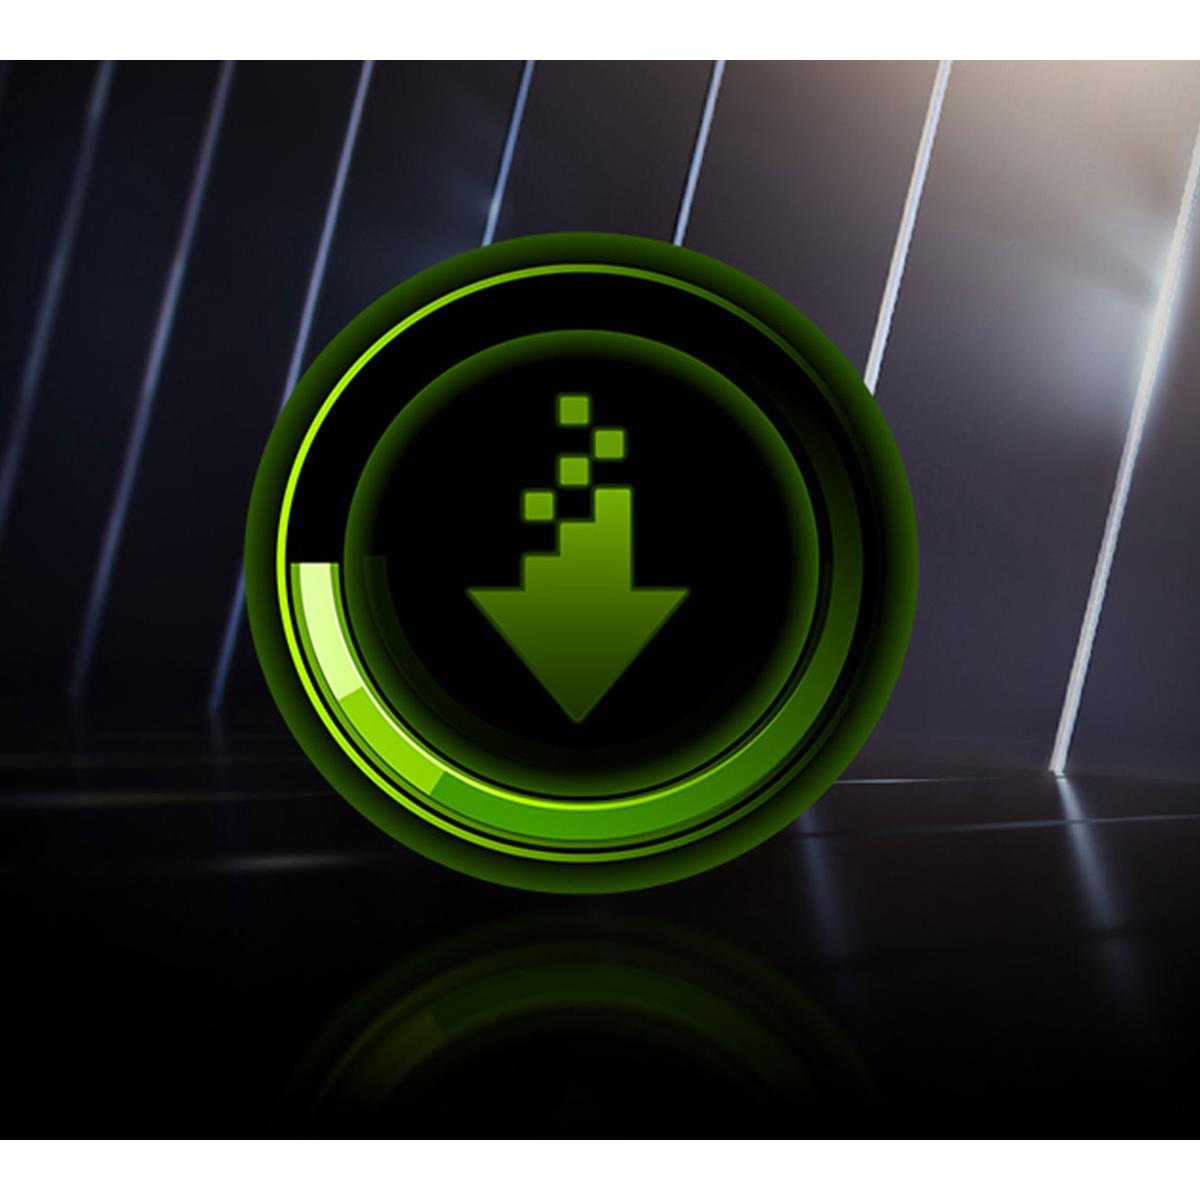 DirectX 12 Ultimate Game Ready Driver Released; Also Includes Support For 9  New G-SYNC Compatible Gaming Monitors, GeForce News